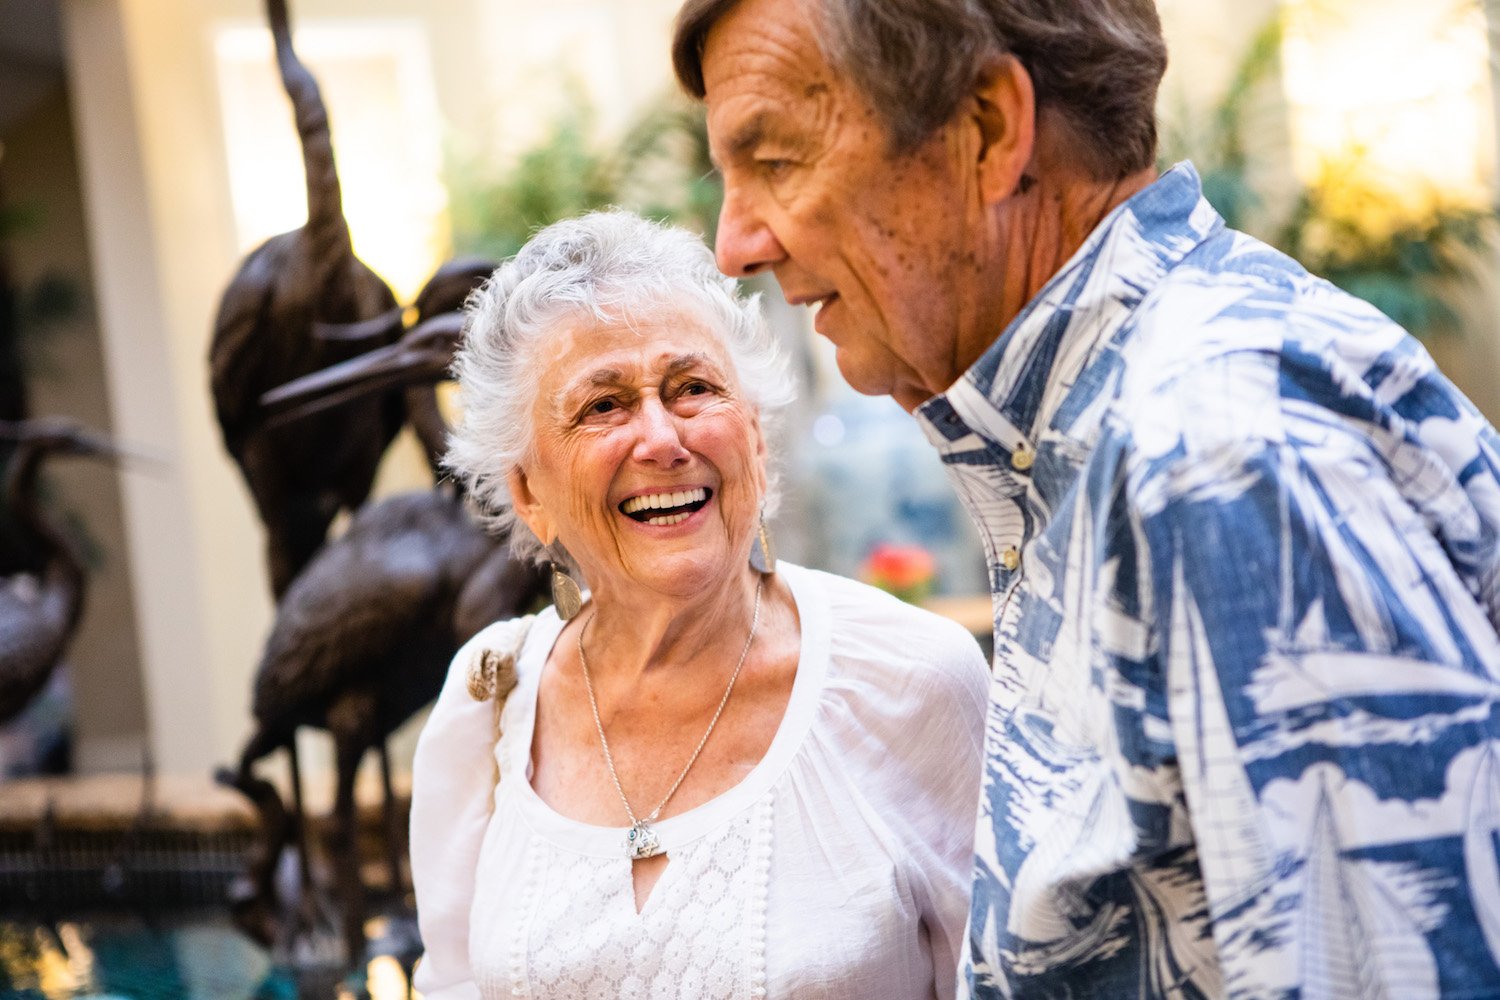 Senior man and woman laughing together in the community lobby